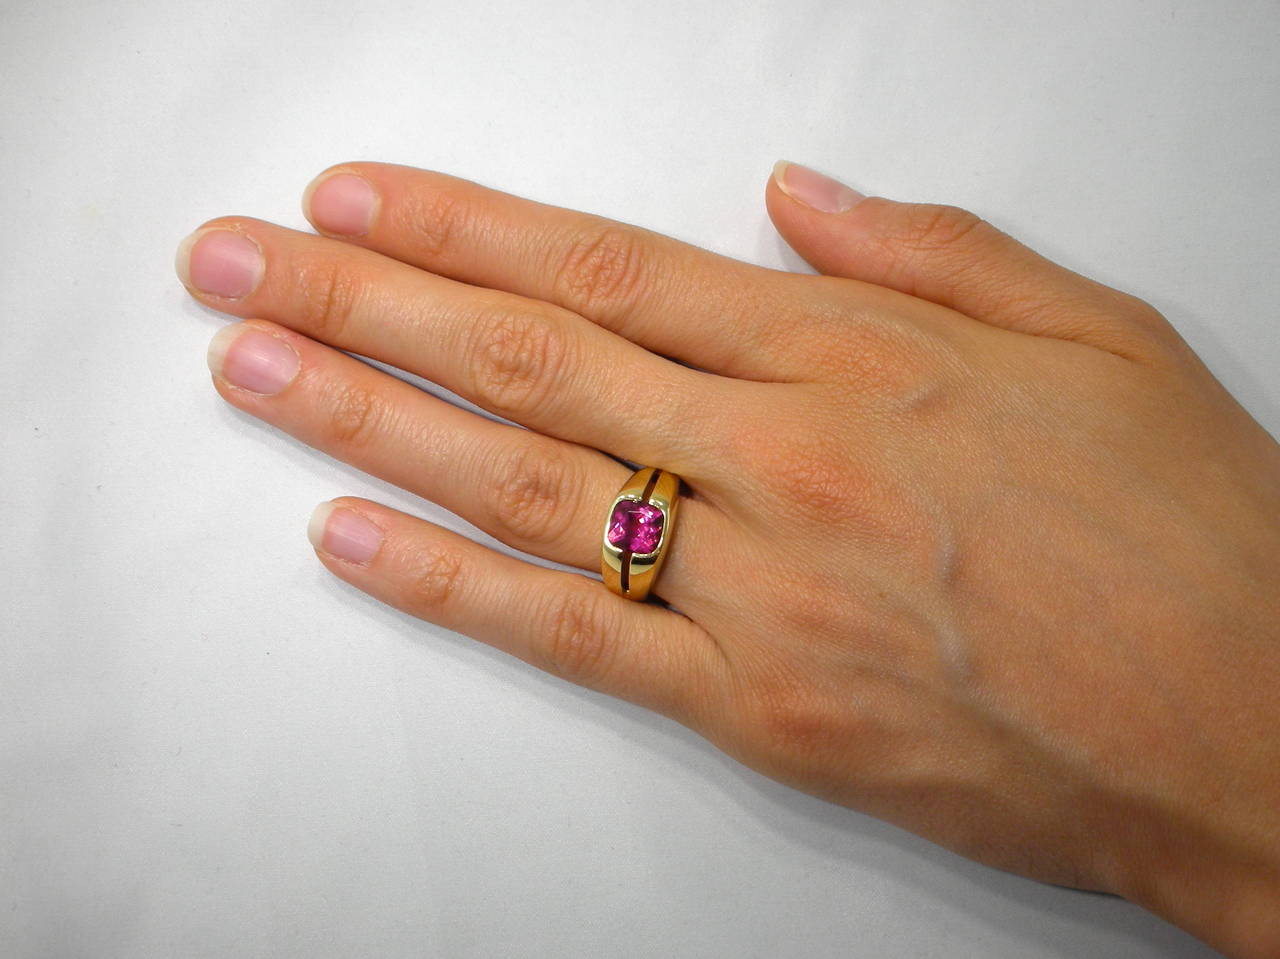 18k yellow gold ring band featuring a 2.05 carat Rubellite. Hand made in Italy by Jona. Size 7 (can be sized).

All of our jewelry is new and has never been previously owned or worn.